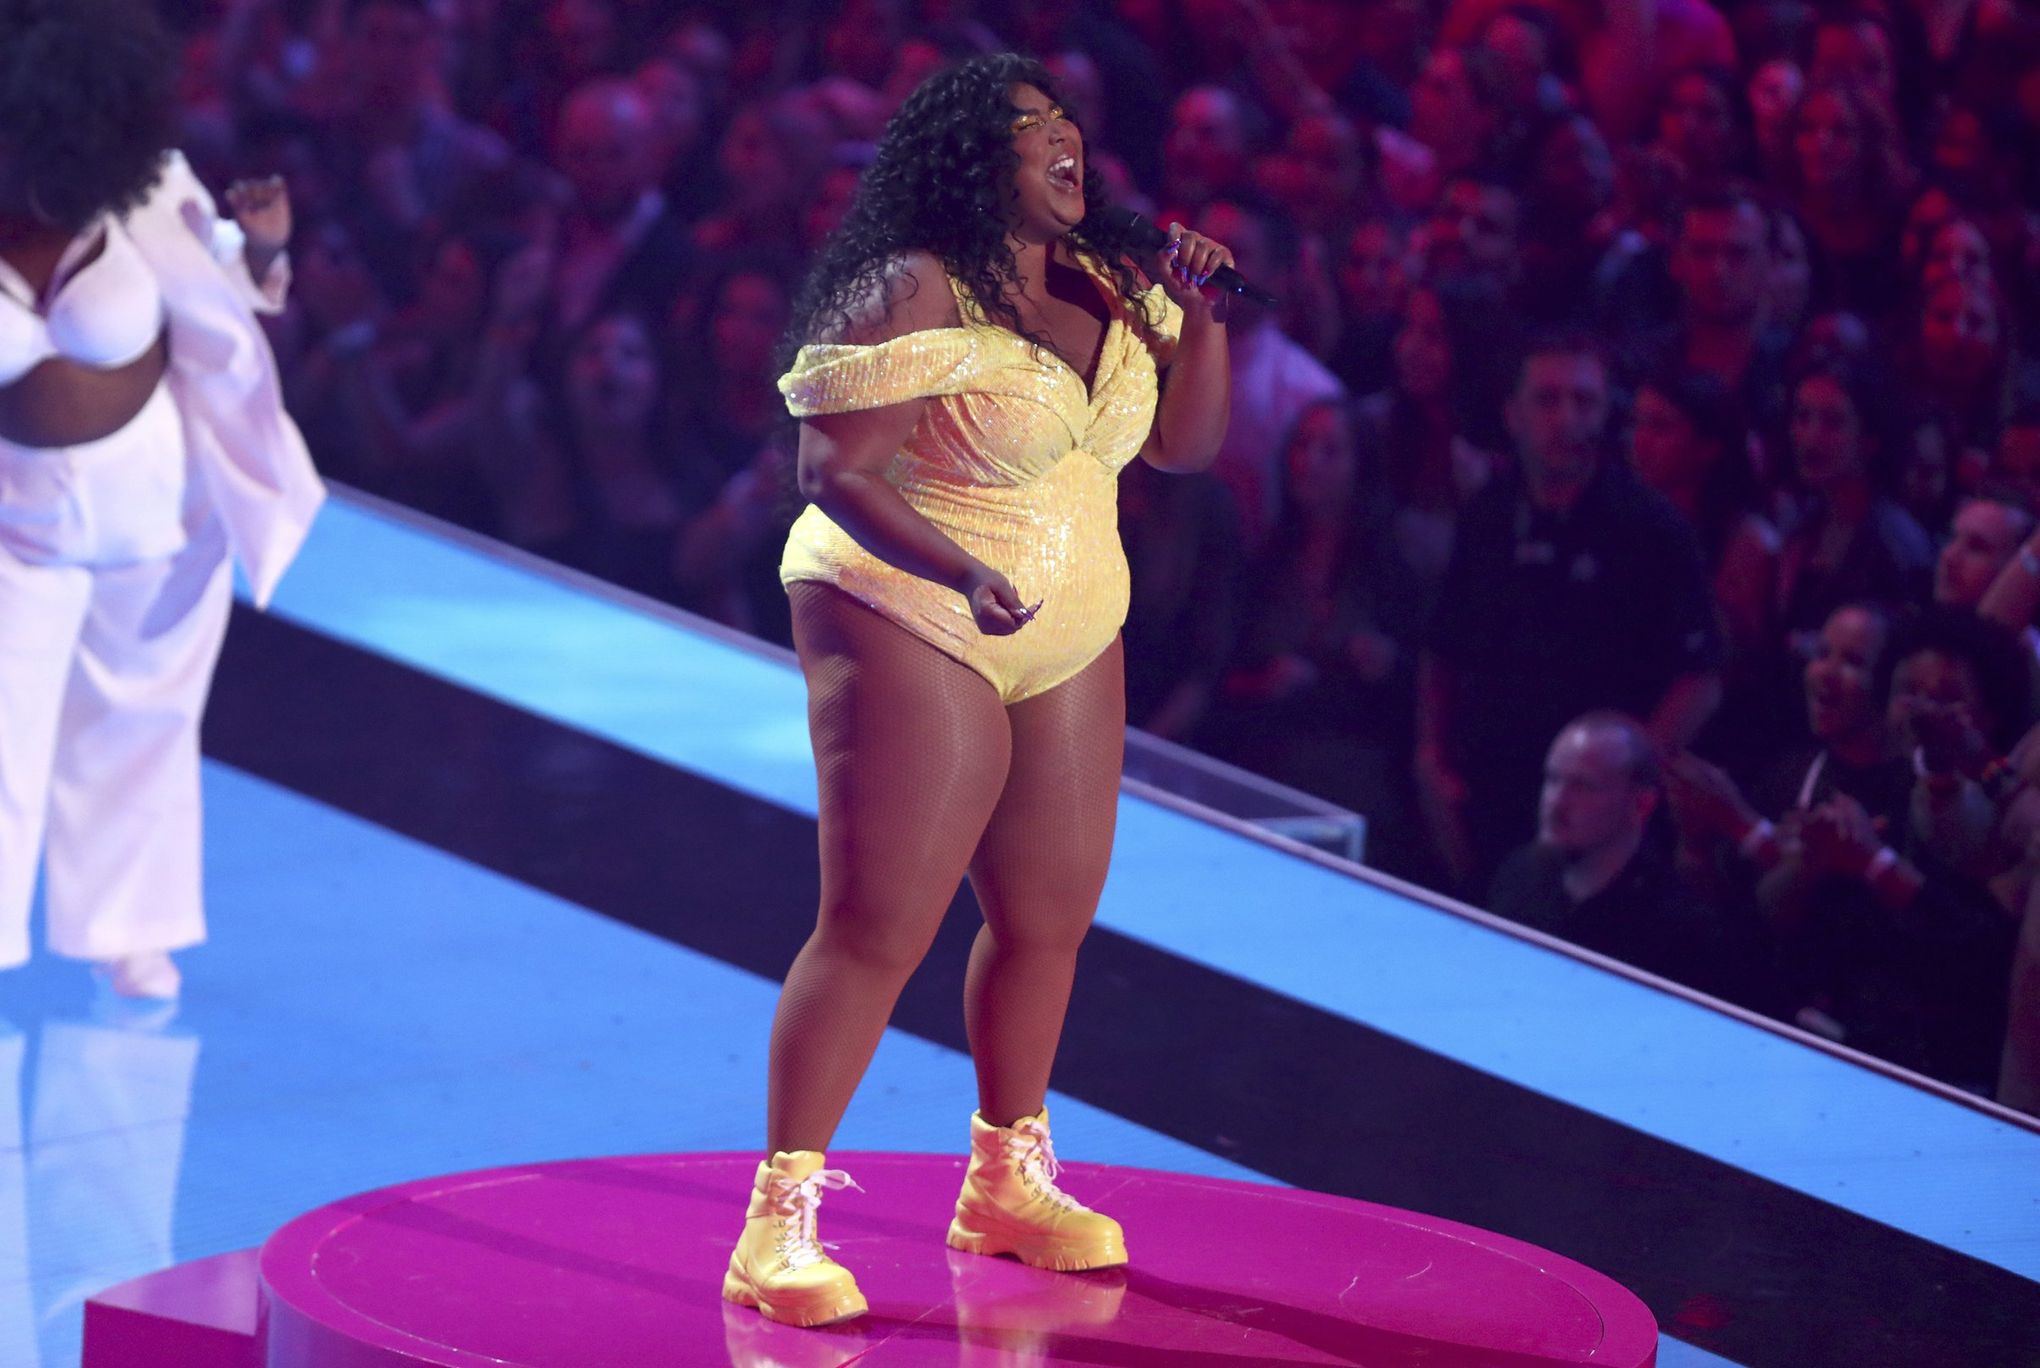 Pop star Lizzo spoke, sang & danced with conviction in Pittsburgh